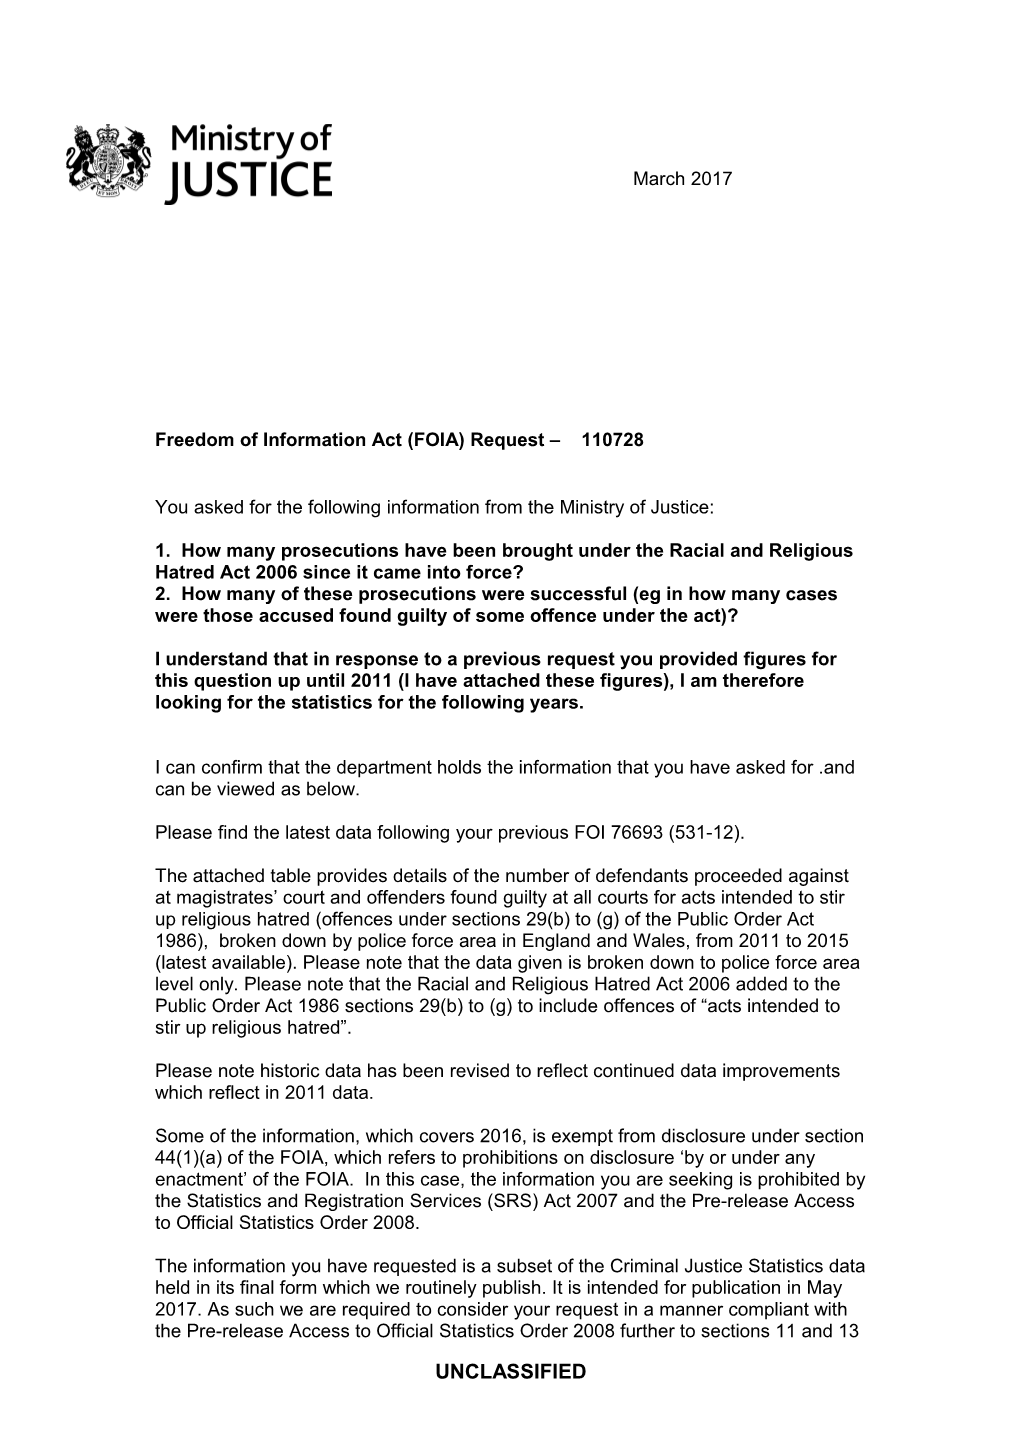 FOI 110728 Racial and Religious Hatred Act 2006 Prosecutions